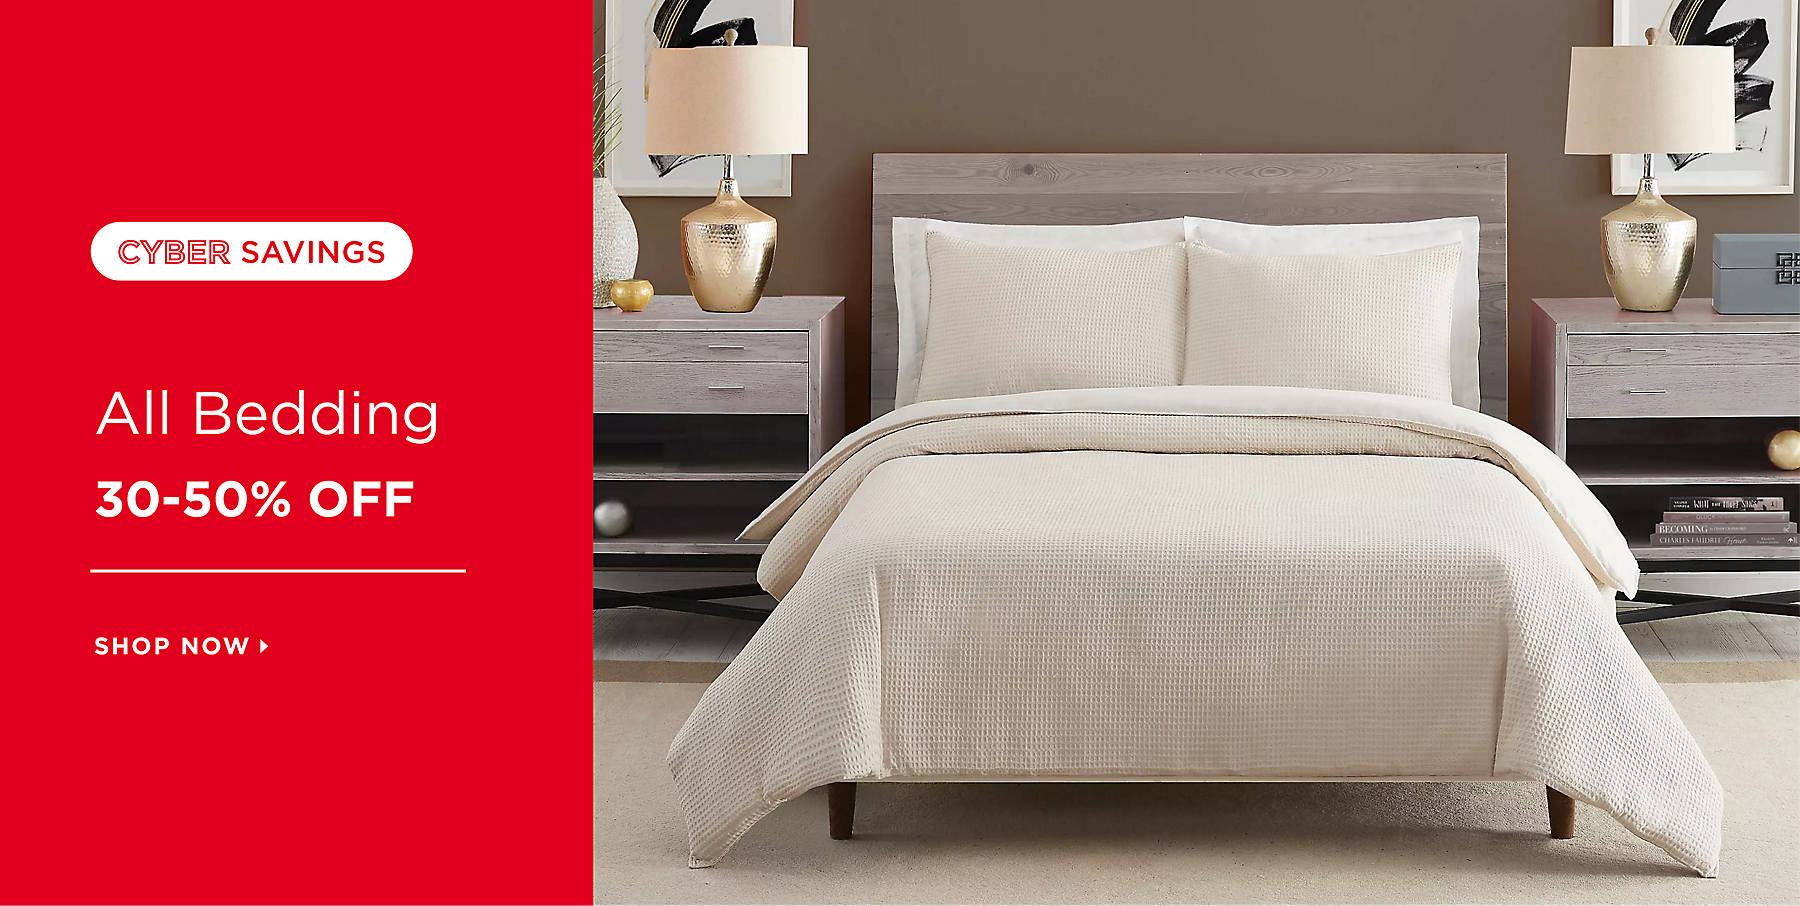 Cyber Savings All Bedding 30-50% Off Shop Now